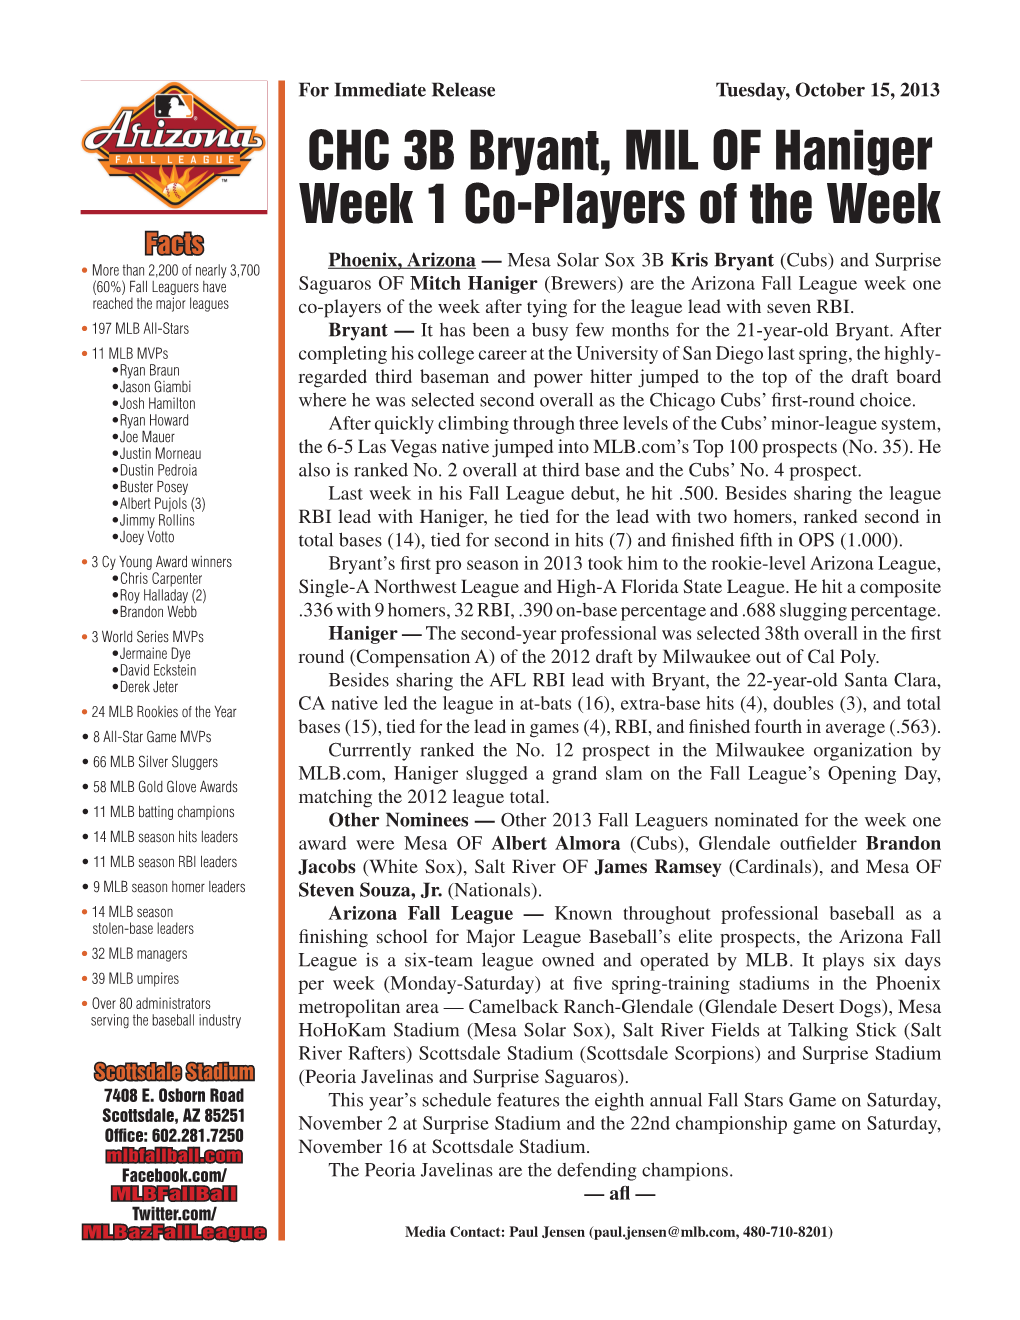 CHC 3B Bryant, MIL of Haniger Week 1 Co-Players of the Week